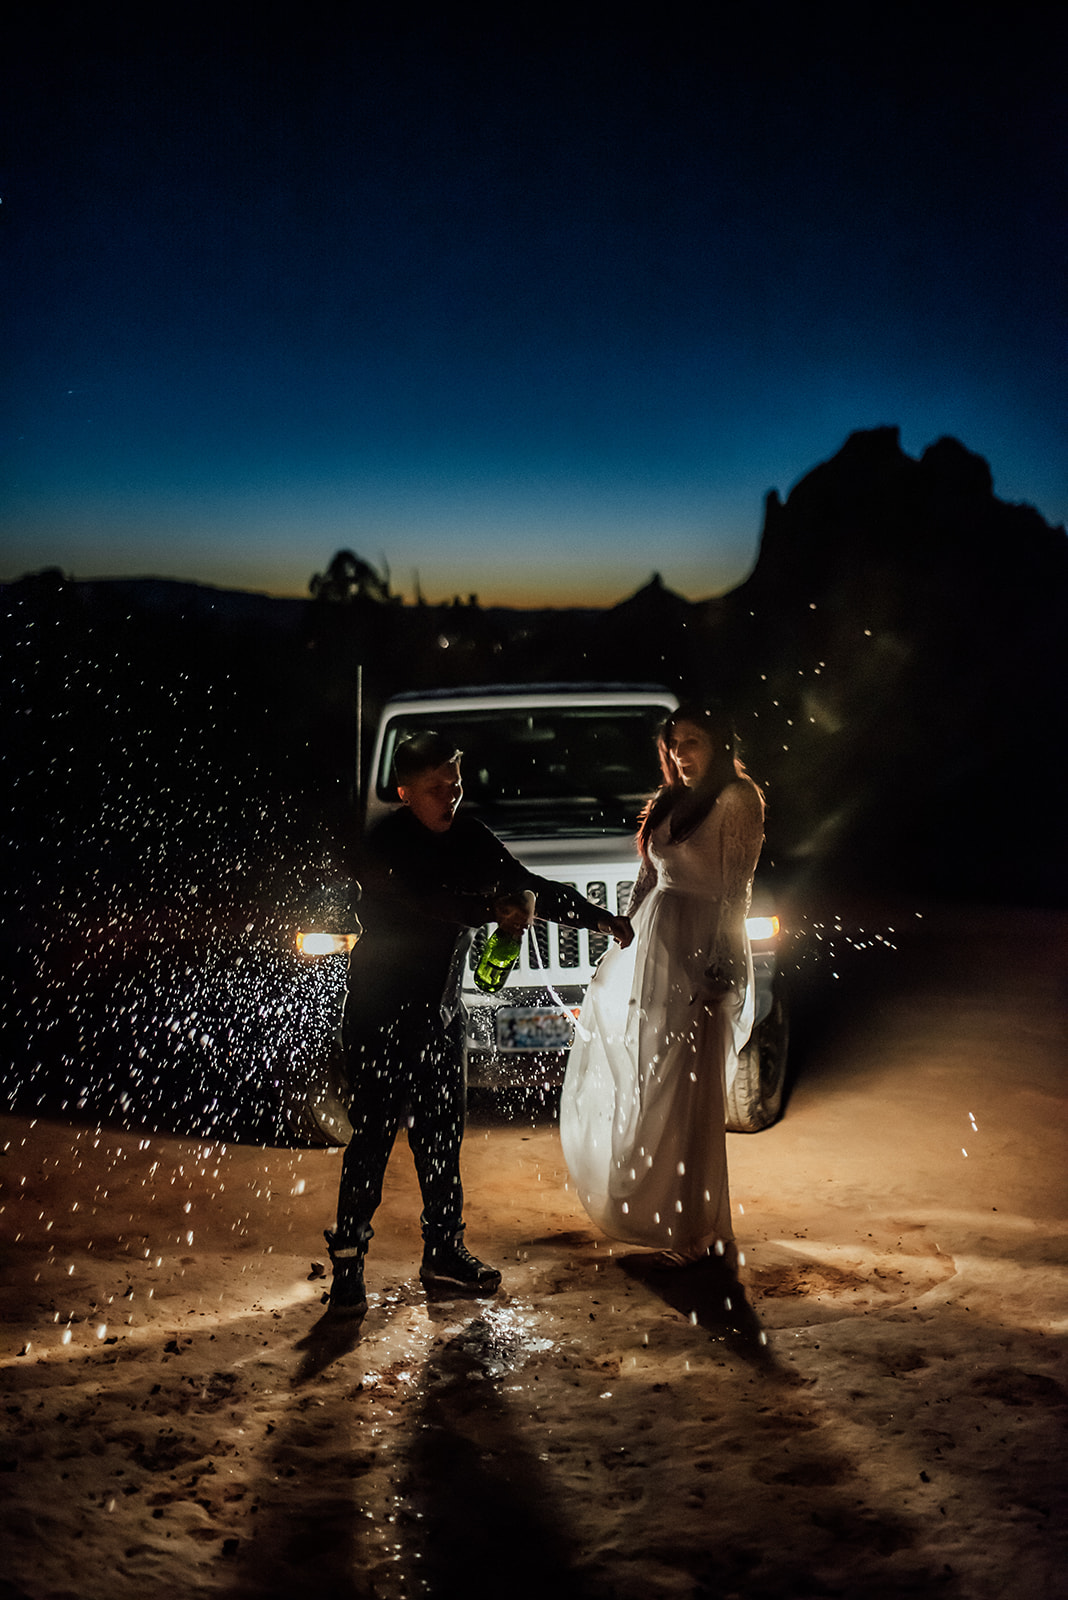 lbtgqia+ couple spraying champagne in front of a jeep with its lights on and sunset behind.